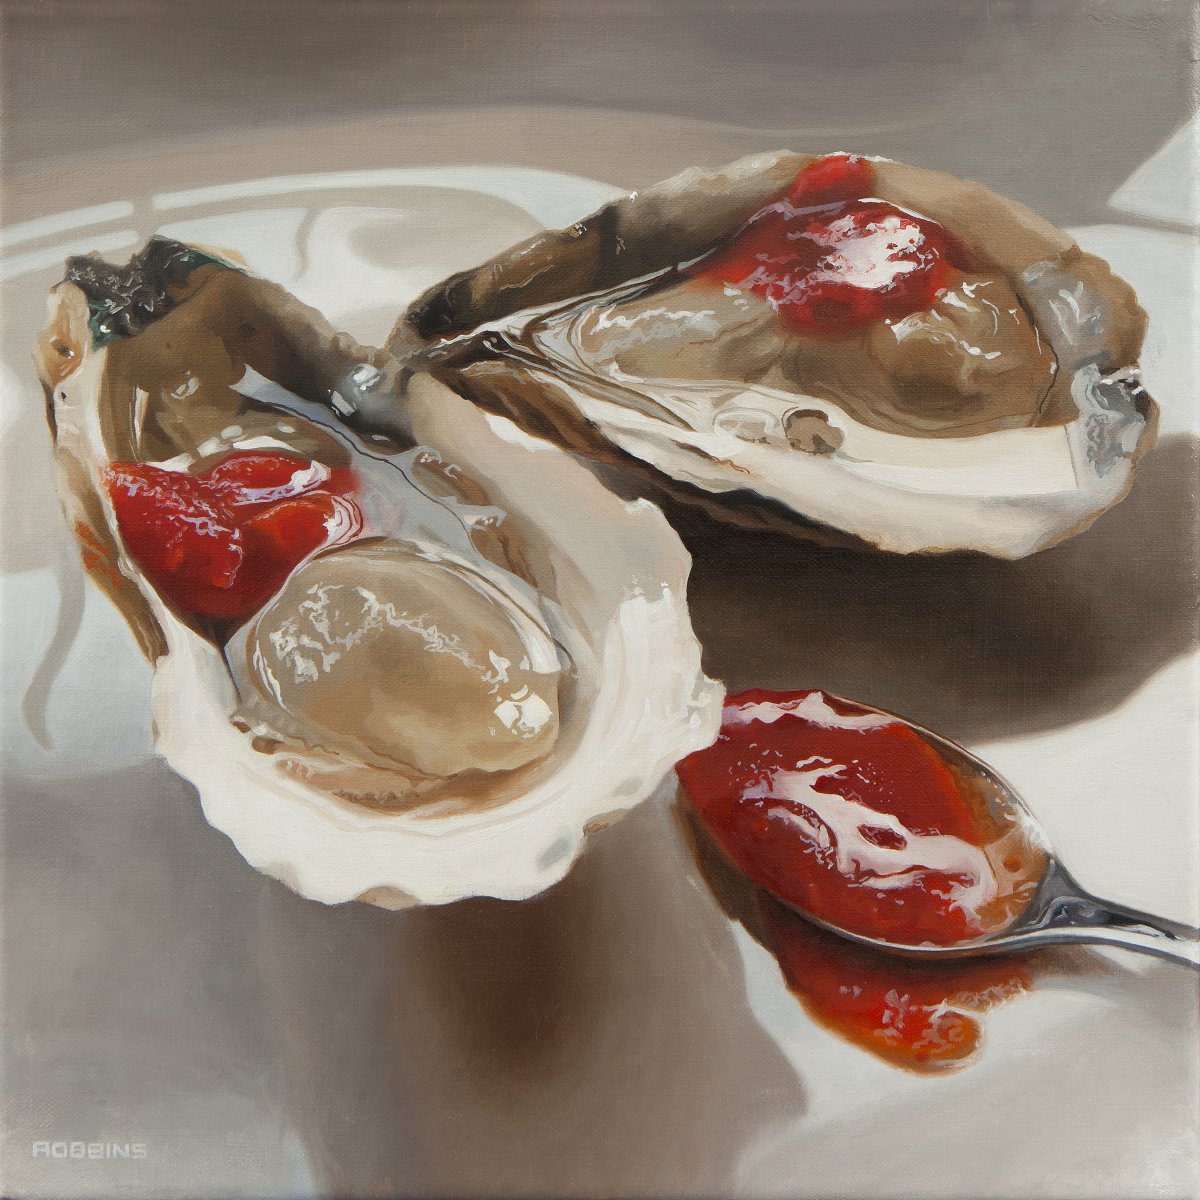 2 Sexy Oysters and a Spoonn - Nadine Robbins